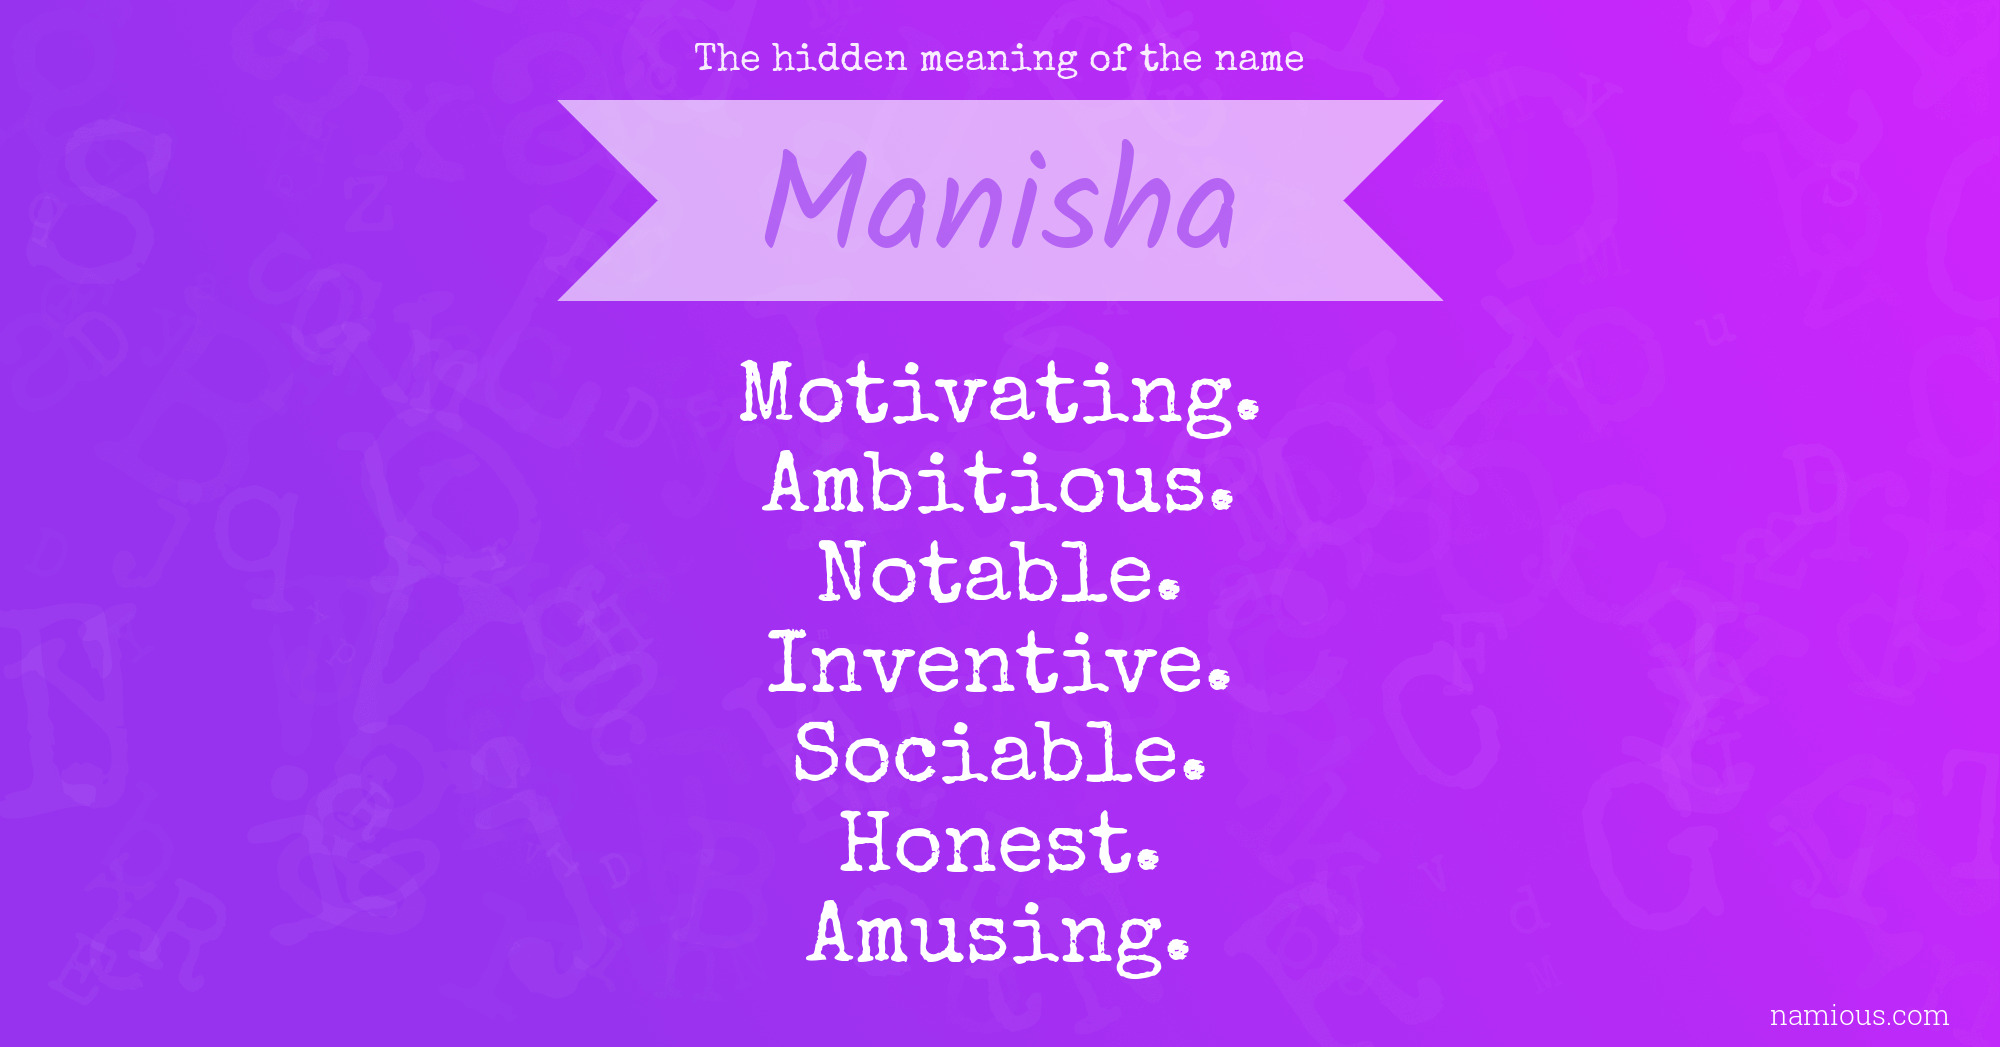 The hidden meaning of the name Manisha